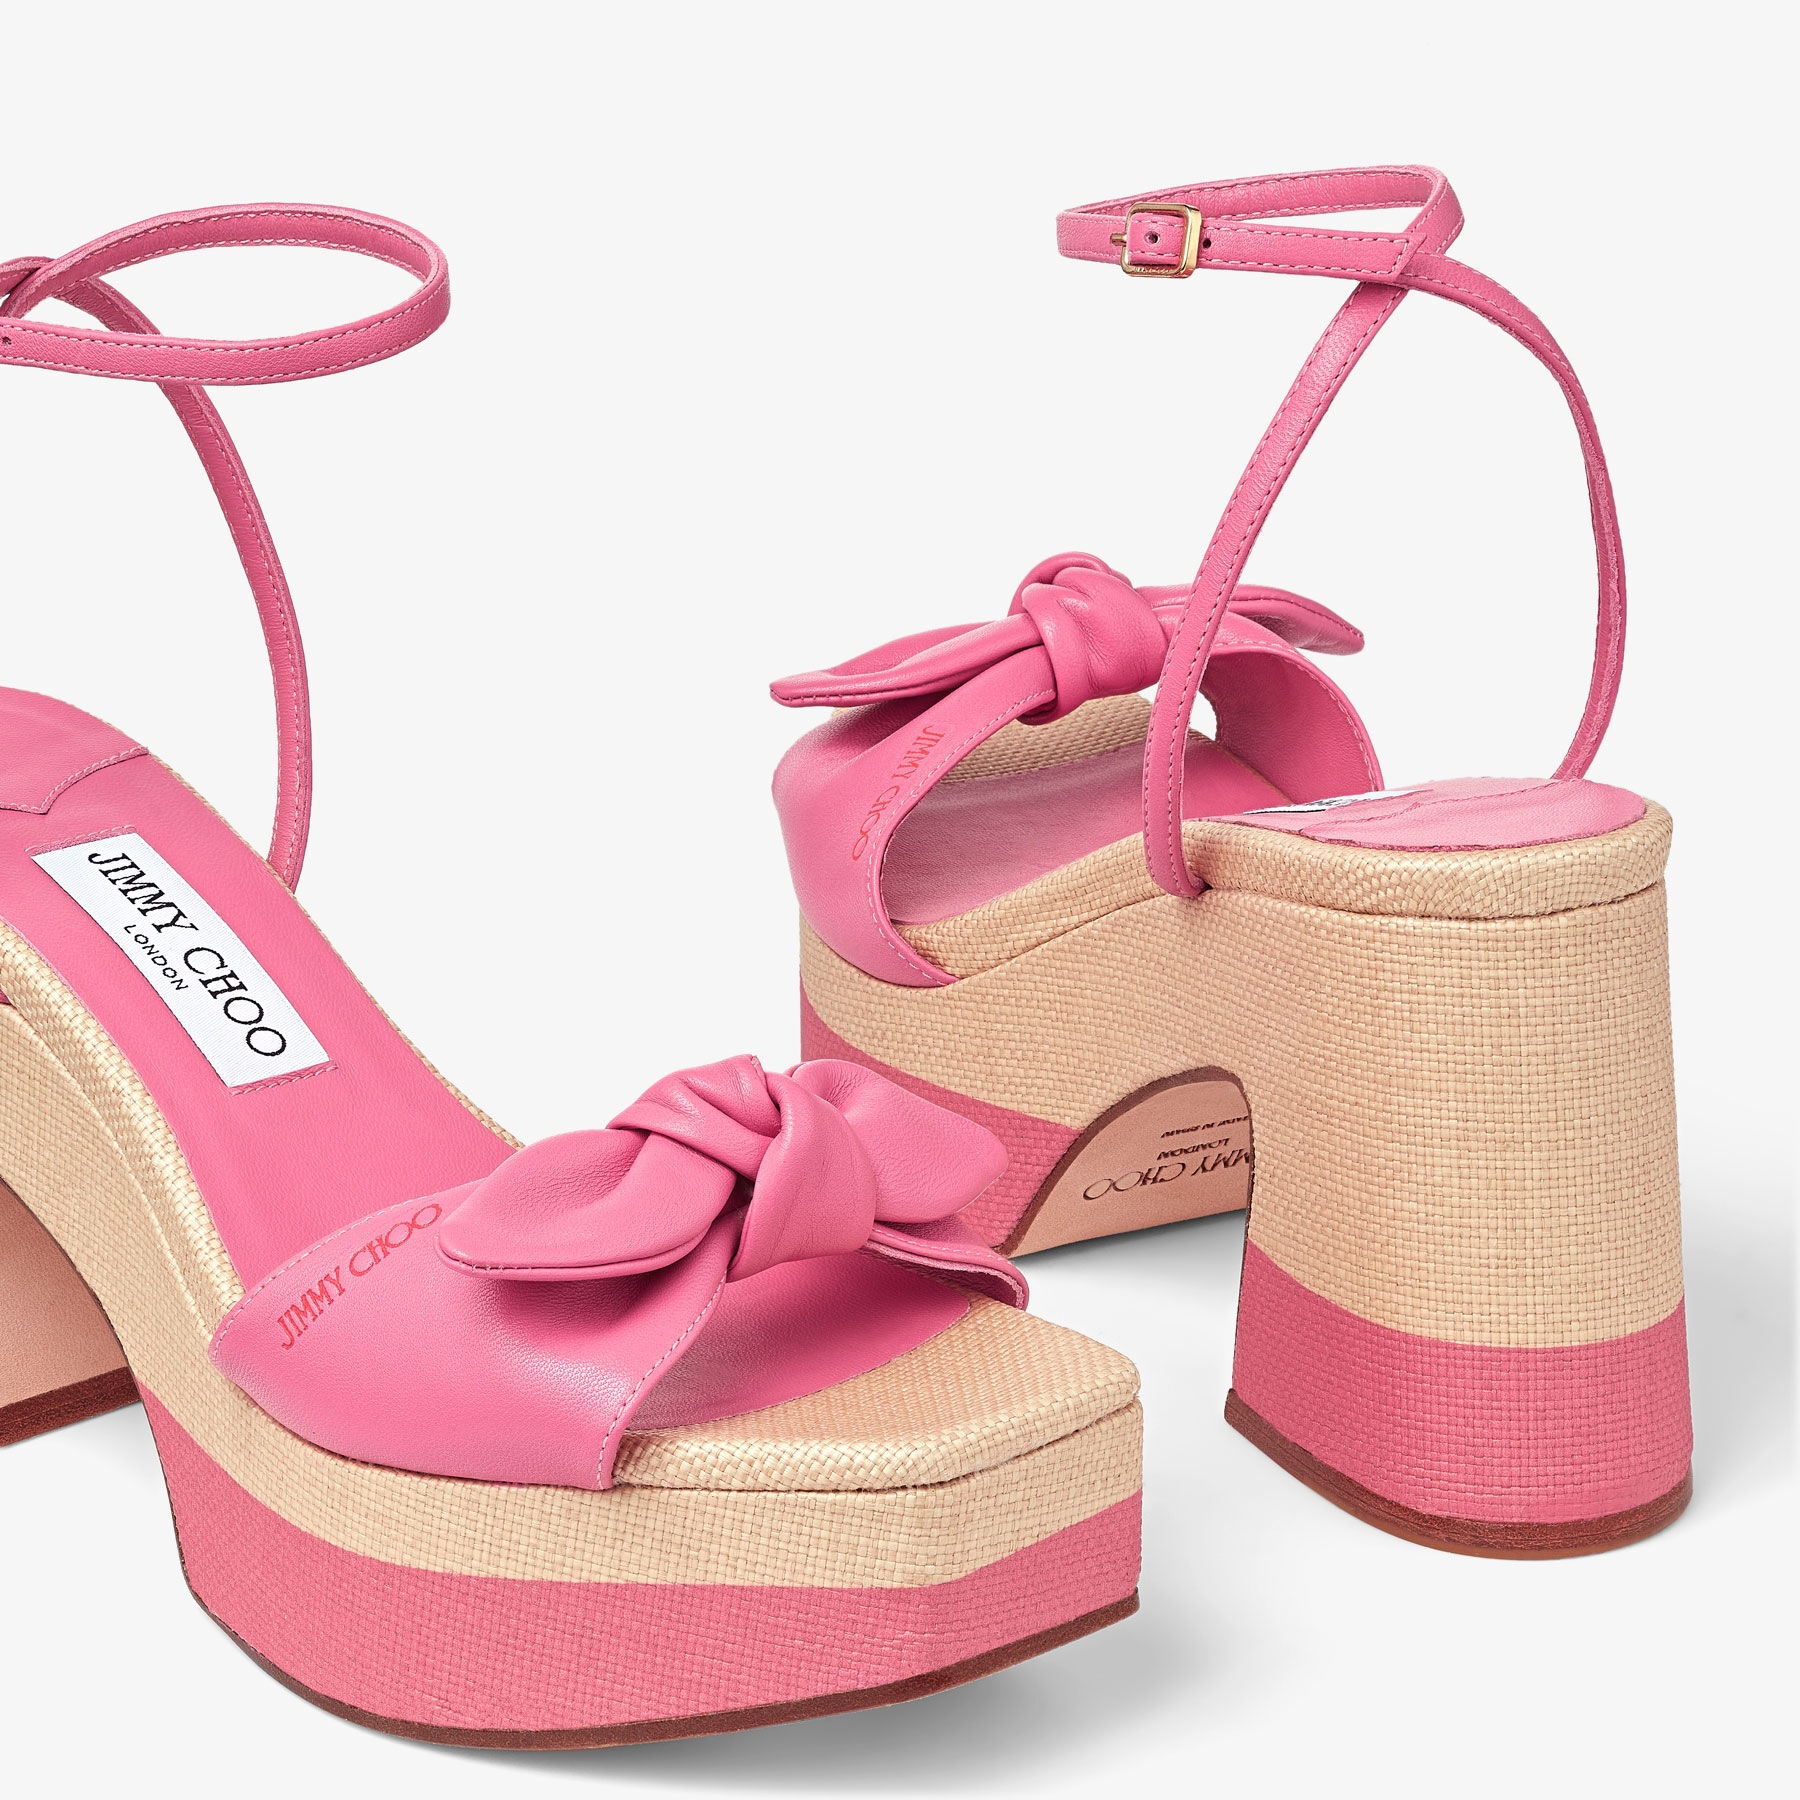 Ricia 95
Candy Pink/Natural Leather and Raffia Platform Sandals - 3